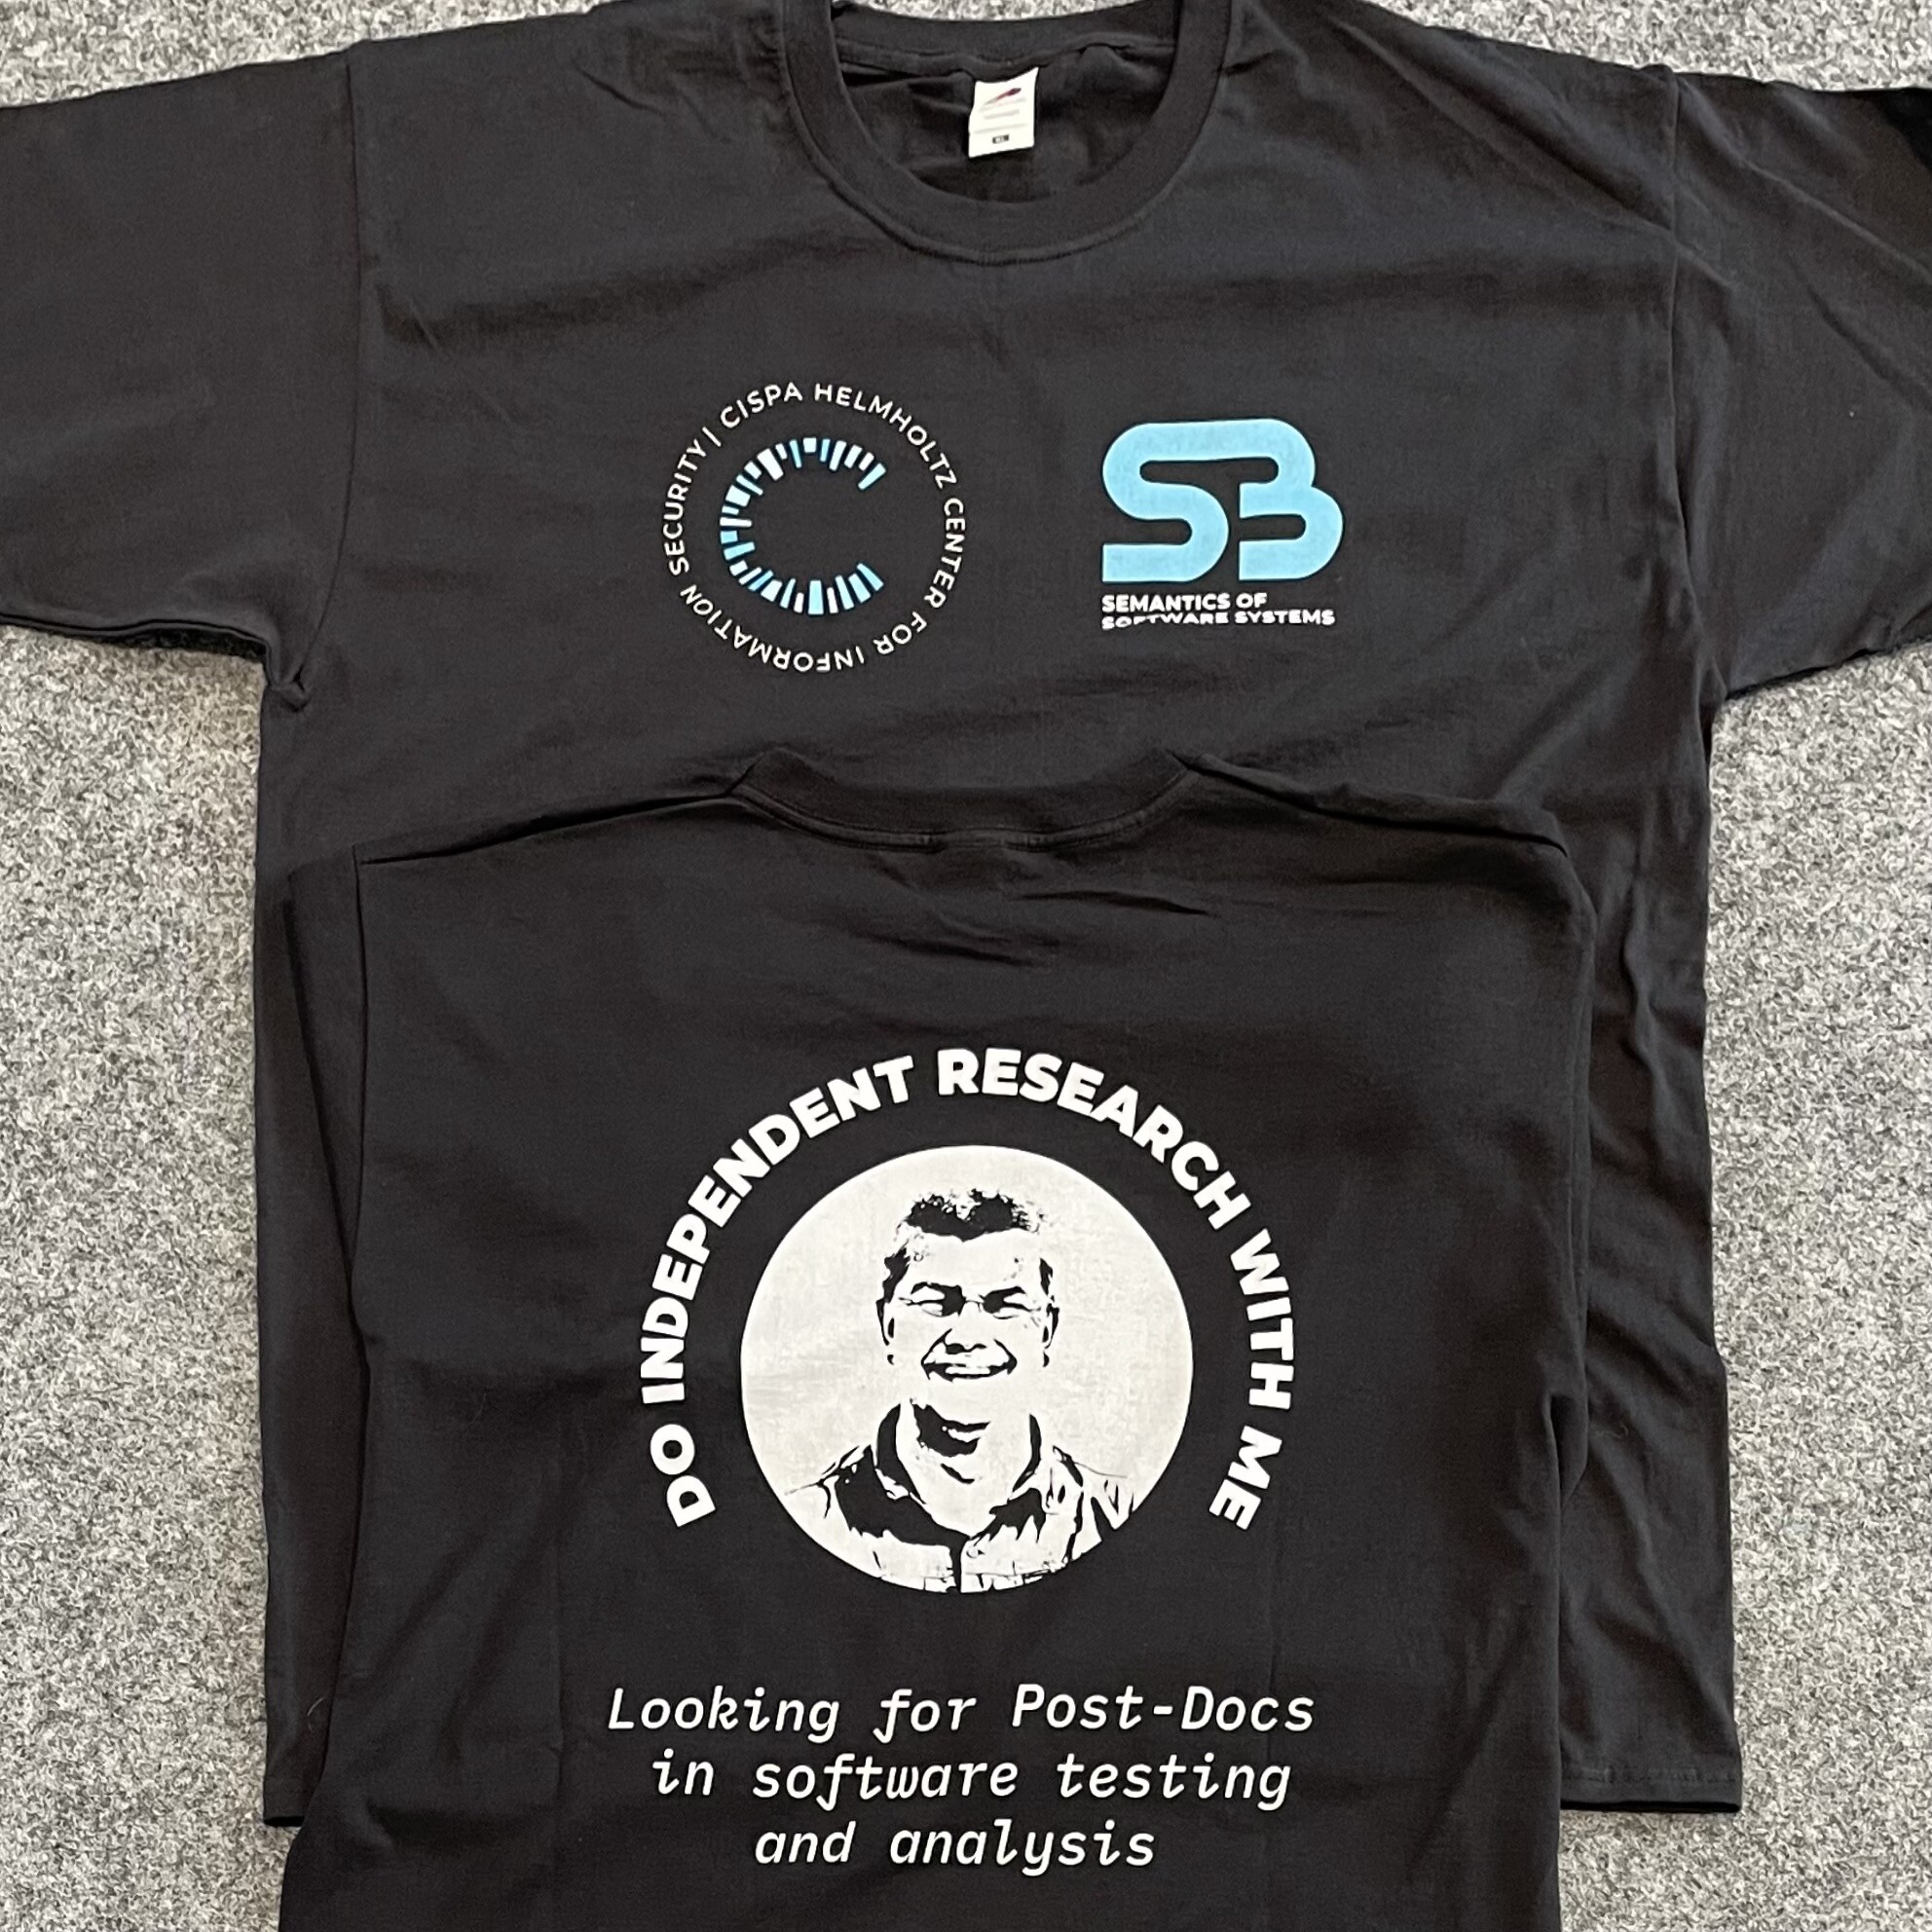 A black T-shirt, front and back. Front shows logos from @CISPA and #S3; the back shows “Looking for Post-Docs in software testing and analysis” and a photo of @AndreasZeller, surrounded by the words “Do independent research with me”